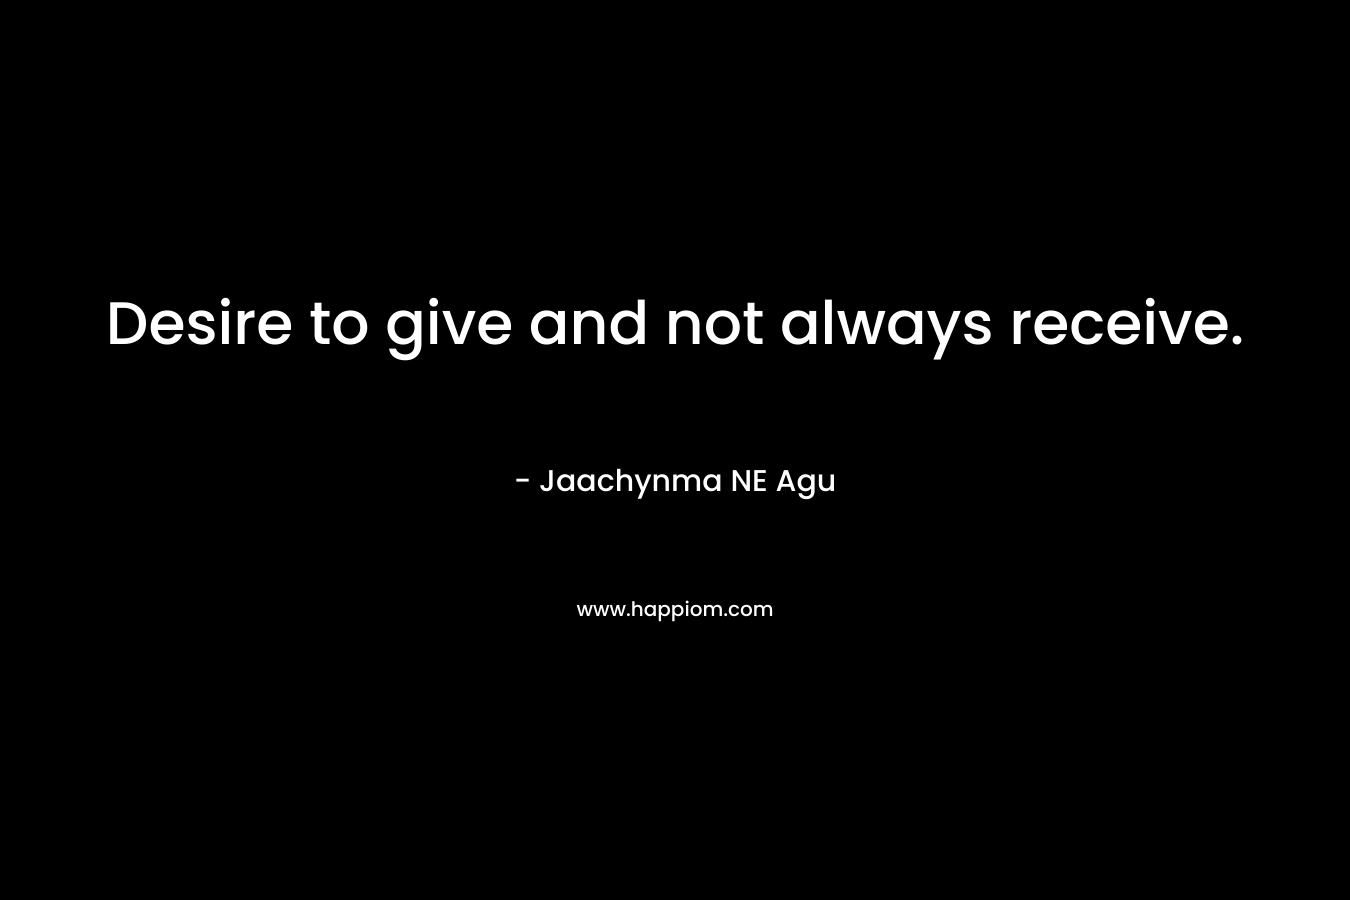 Desire to give and not always receive.